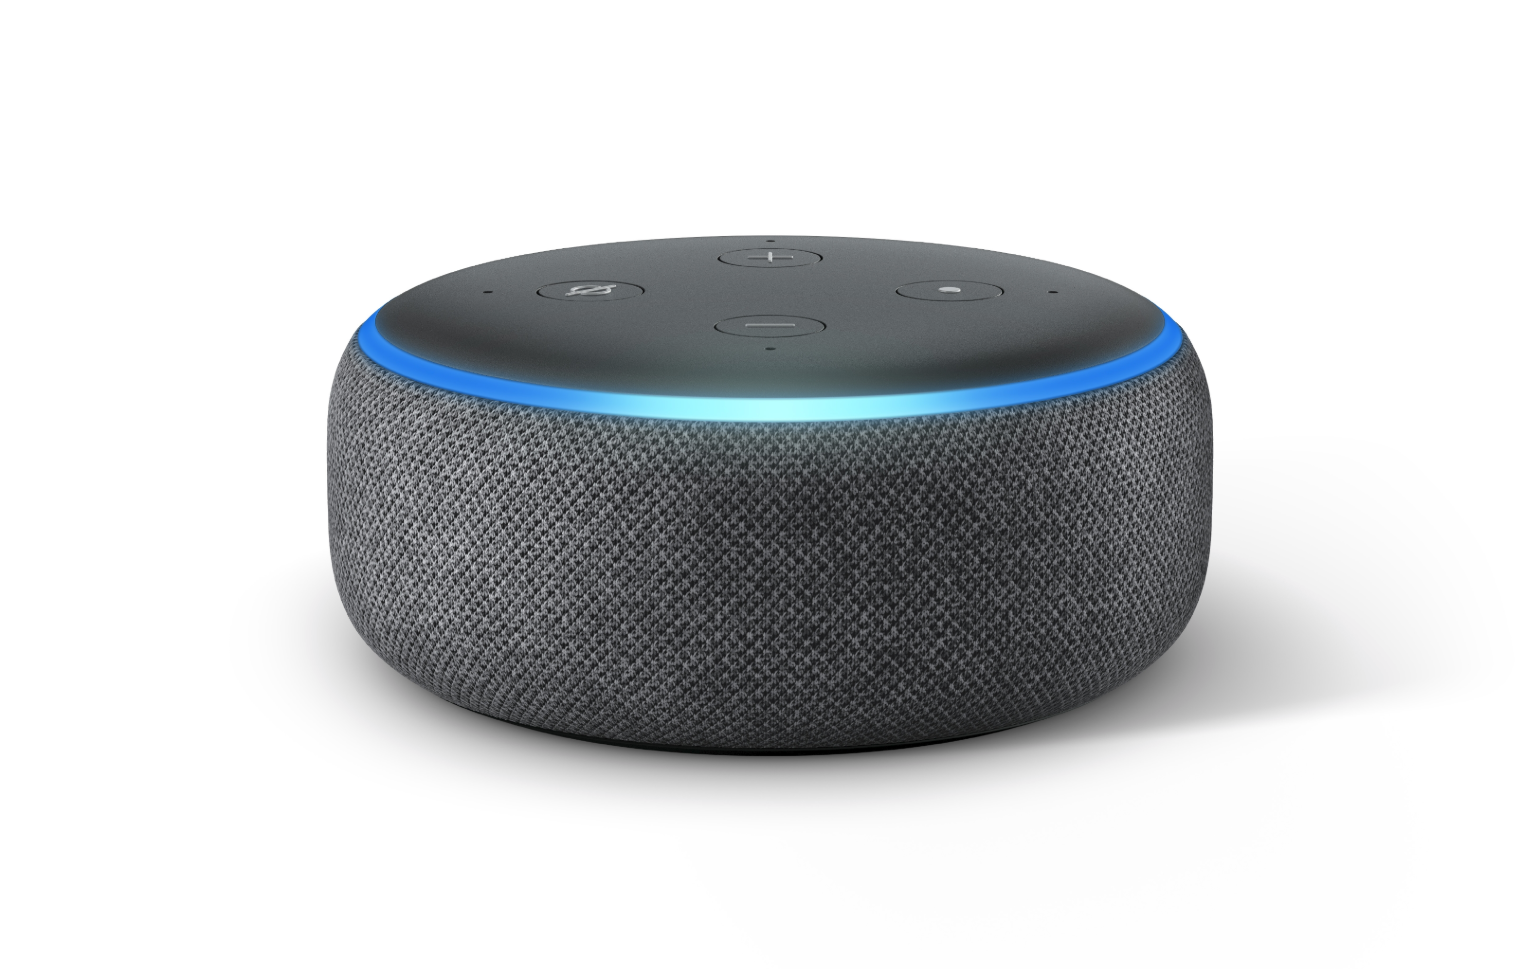 An Amazon Echo situated against a white background